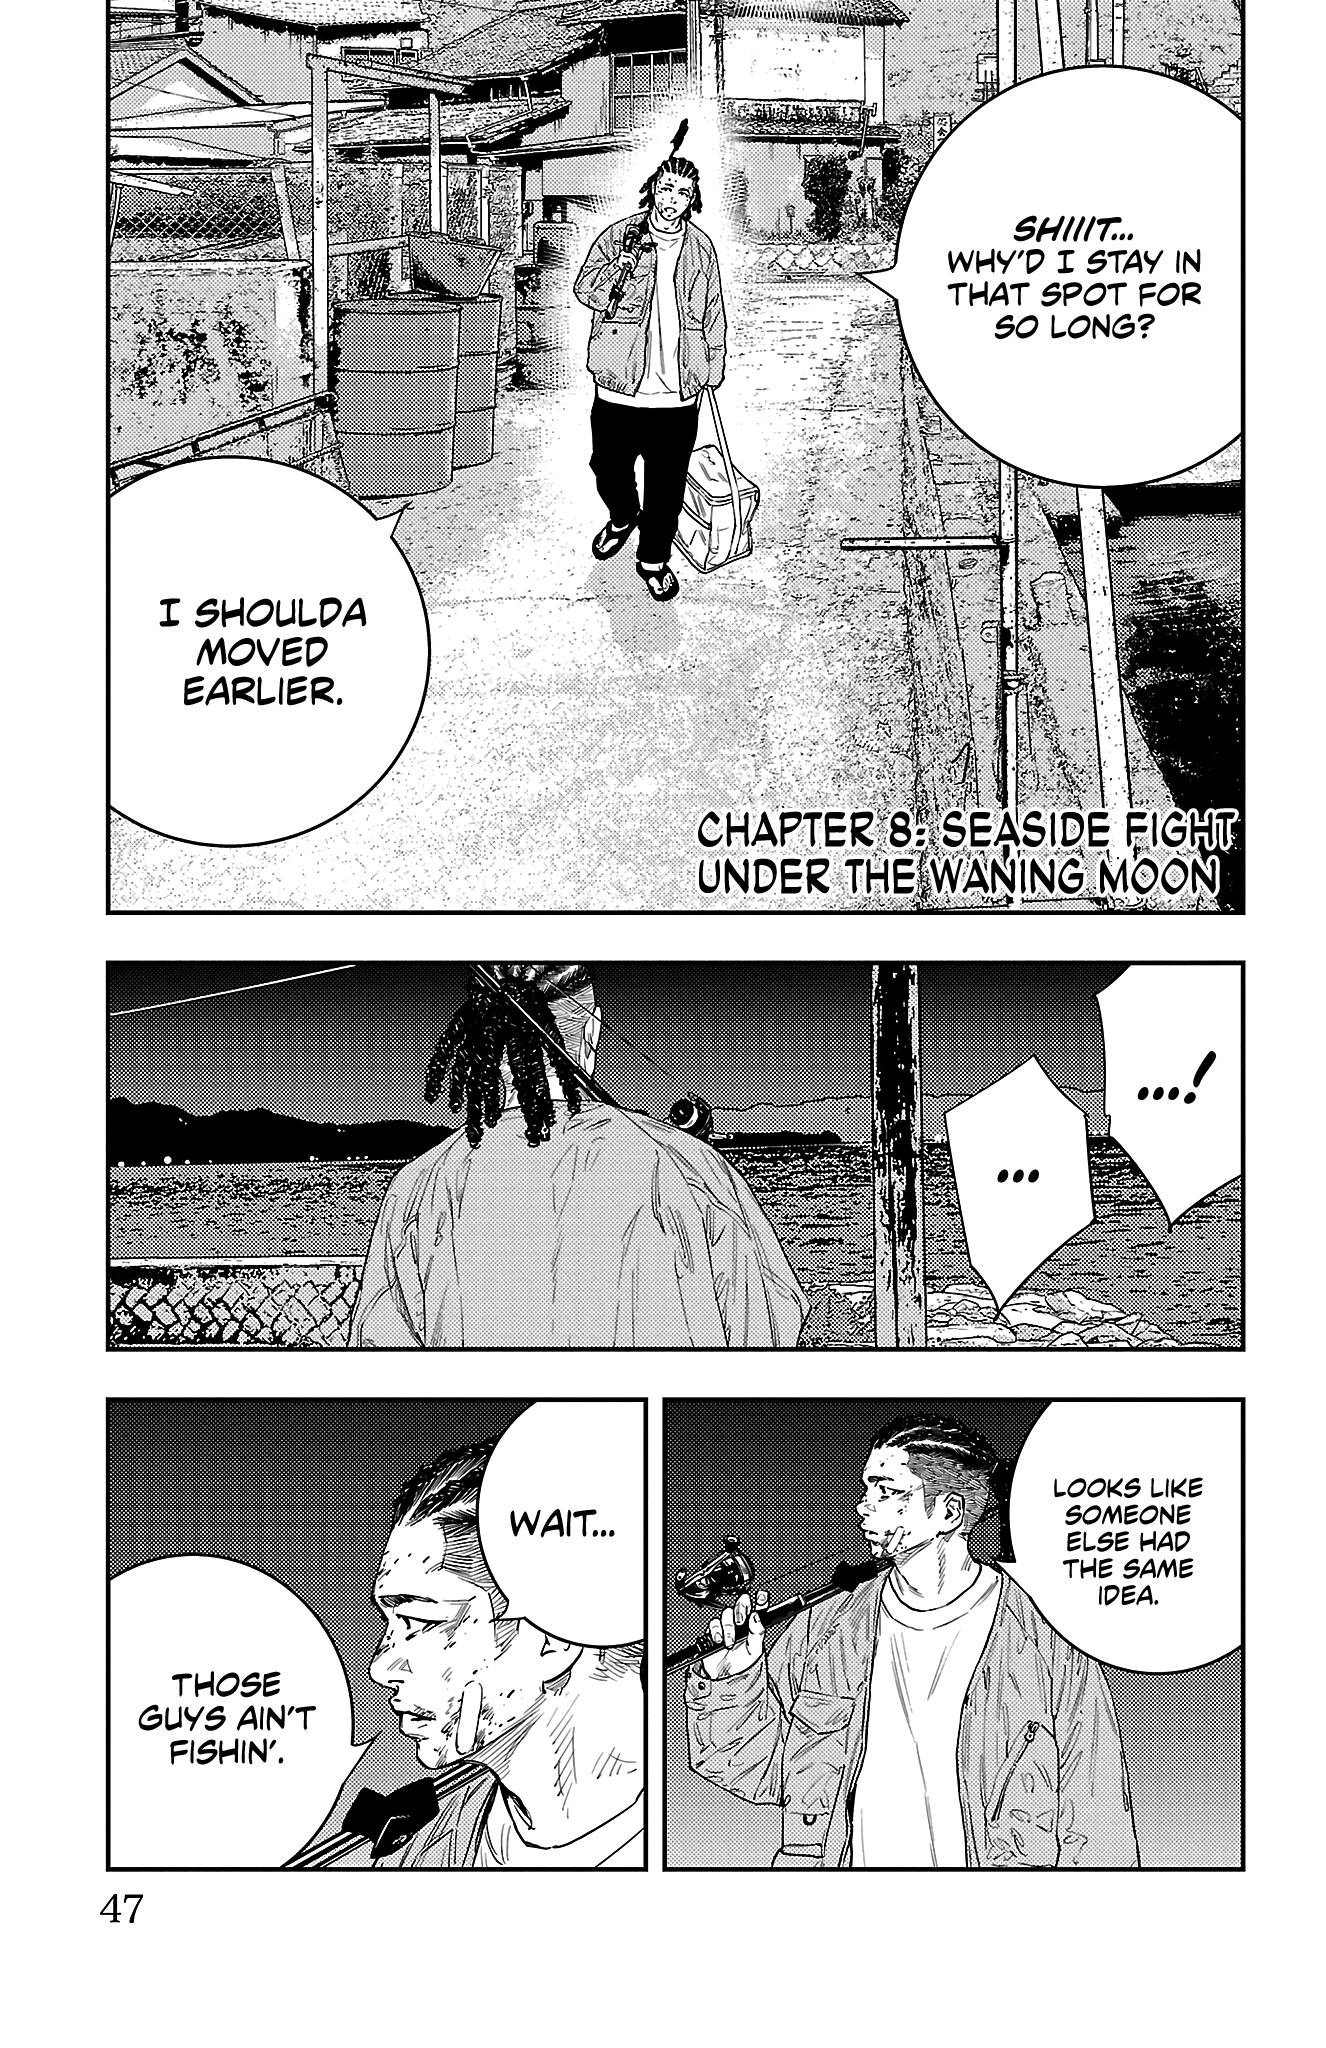 Nine Peaks Vol.2 Chapter 8: Seaside Fight Under The Waning Moon - Picture 3